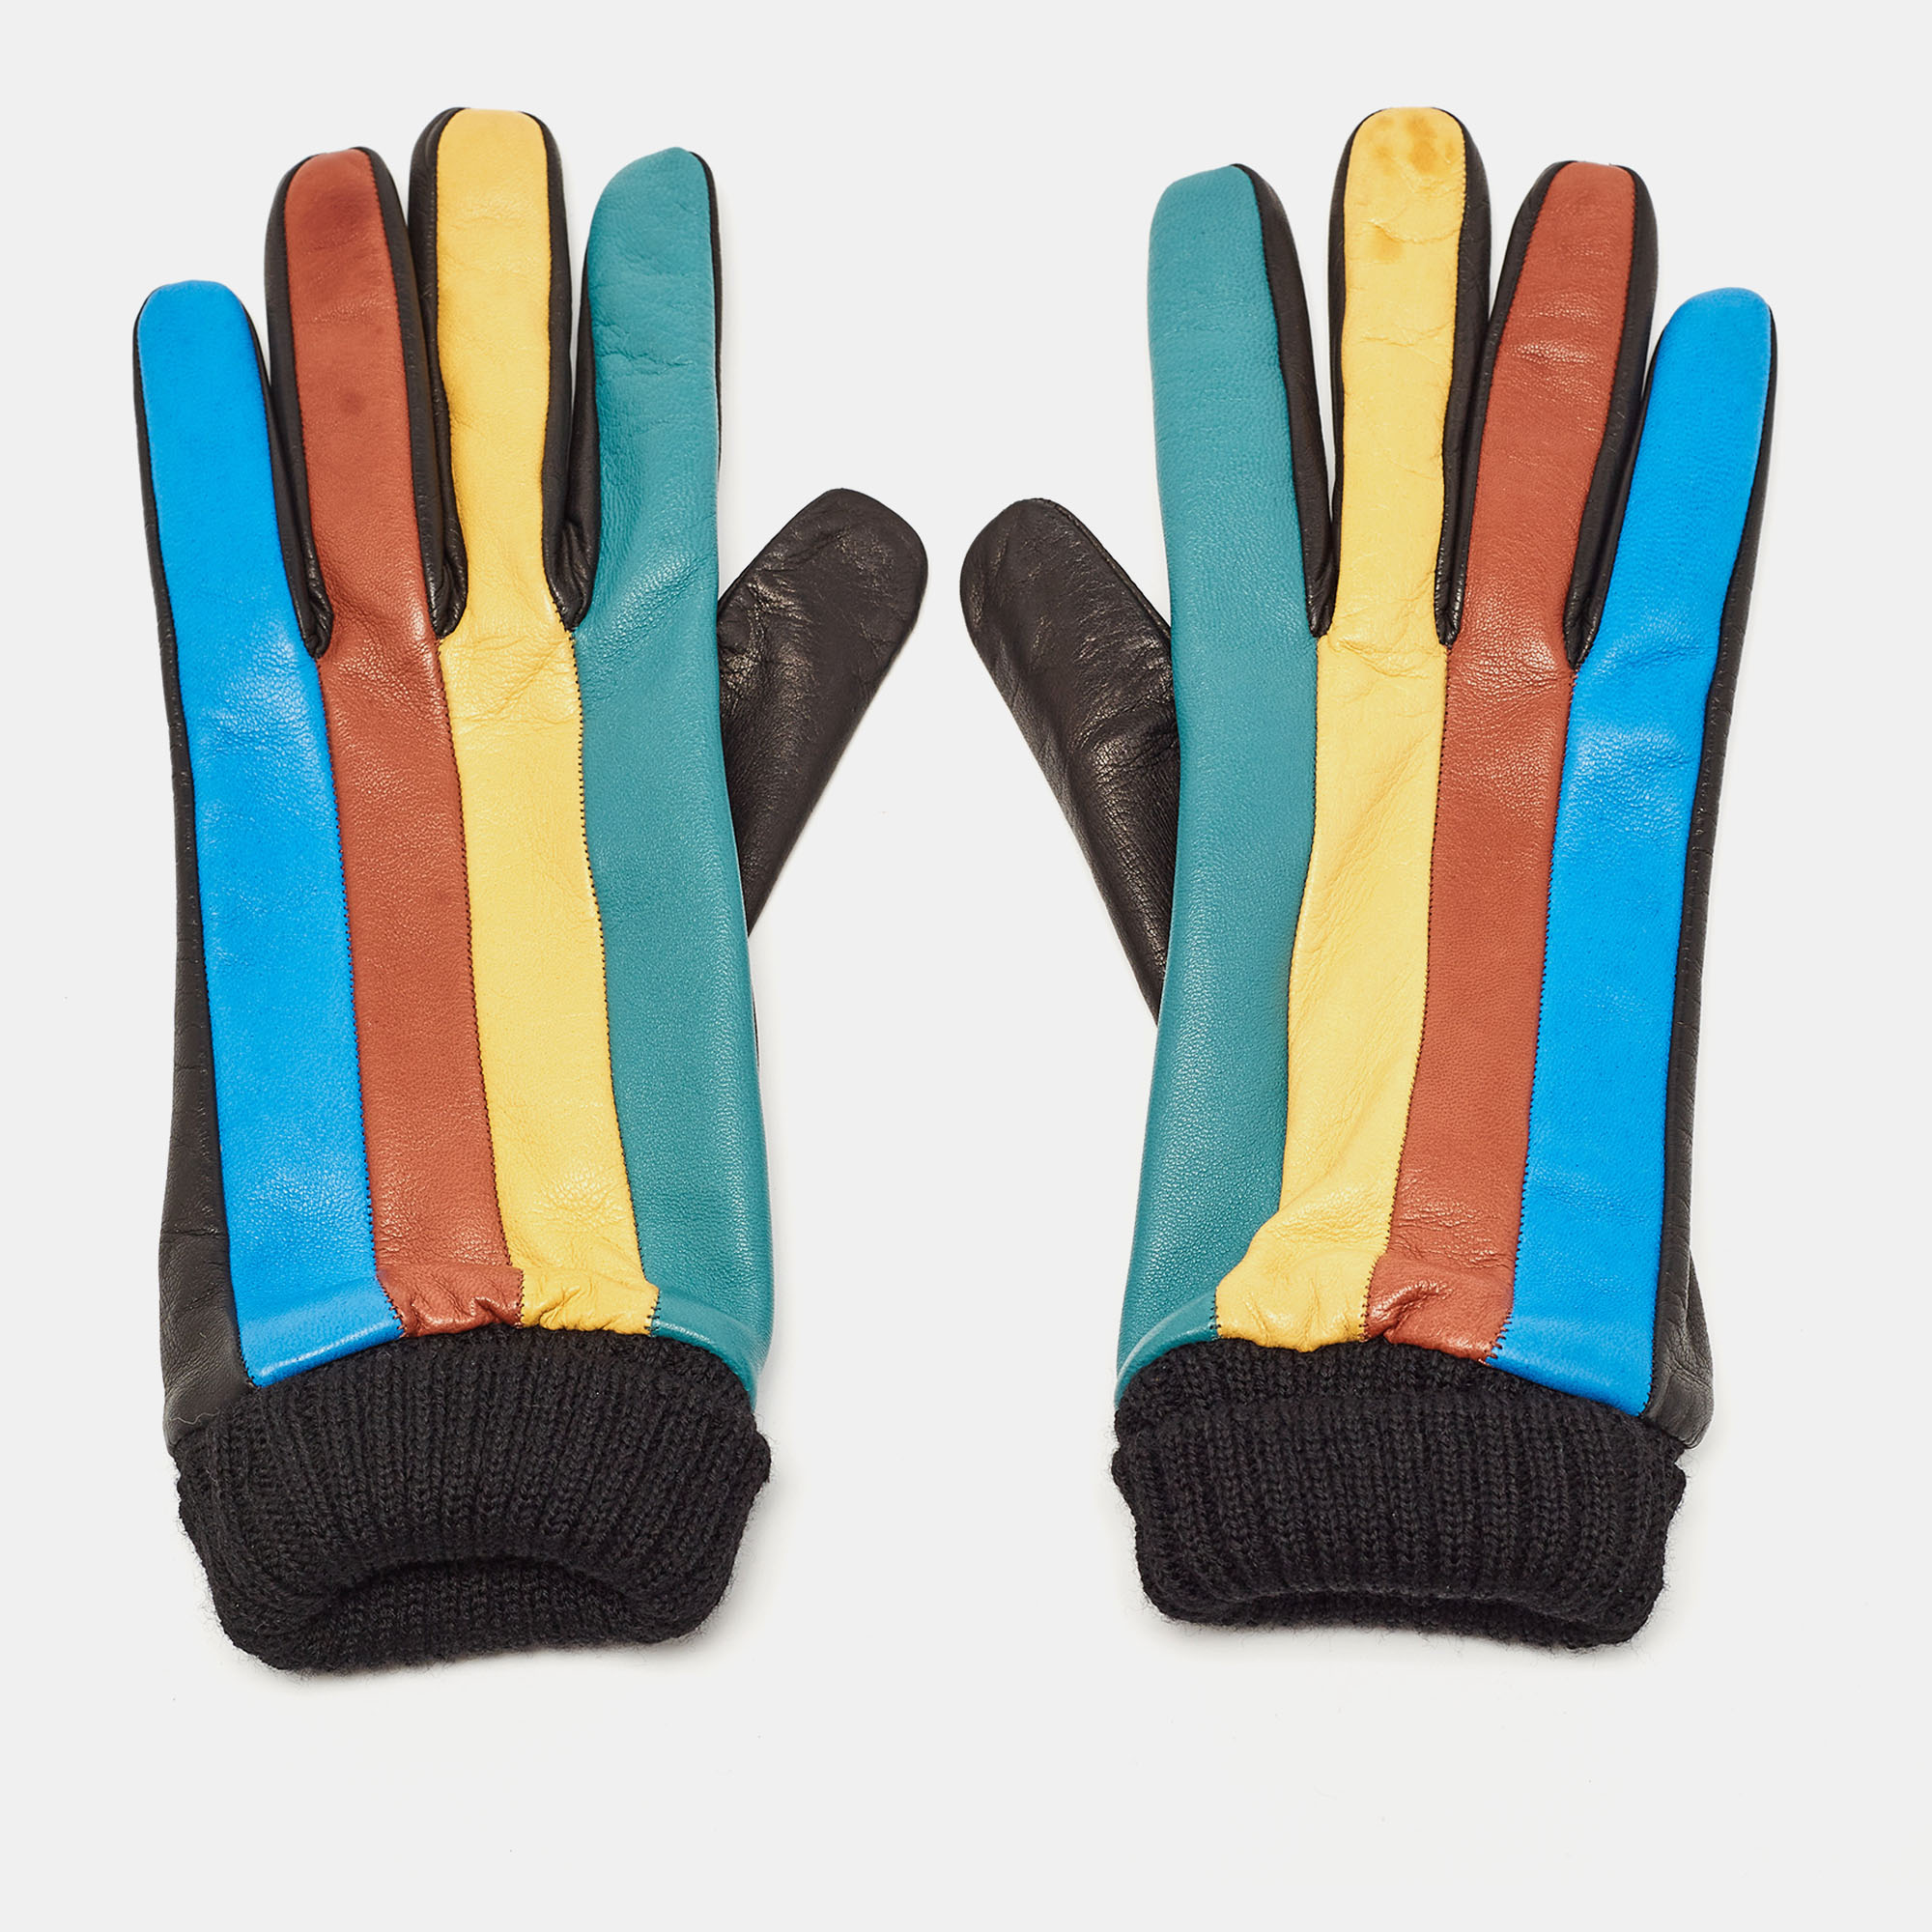 Crafted from supple leather the Missoni gloves are a fusion of luxury and style. Vivid hues converge in precise blocks adding a pop of color to winter ensembles. With a snug fit and exquisite craftsmanship they effortlessly blend fashion and function promising warmth without compromising on elegance.